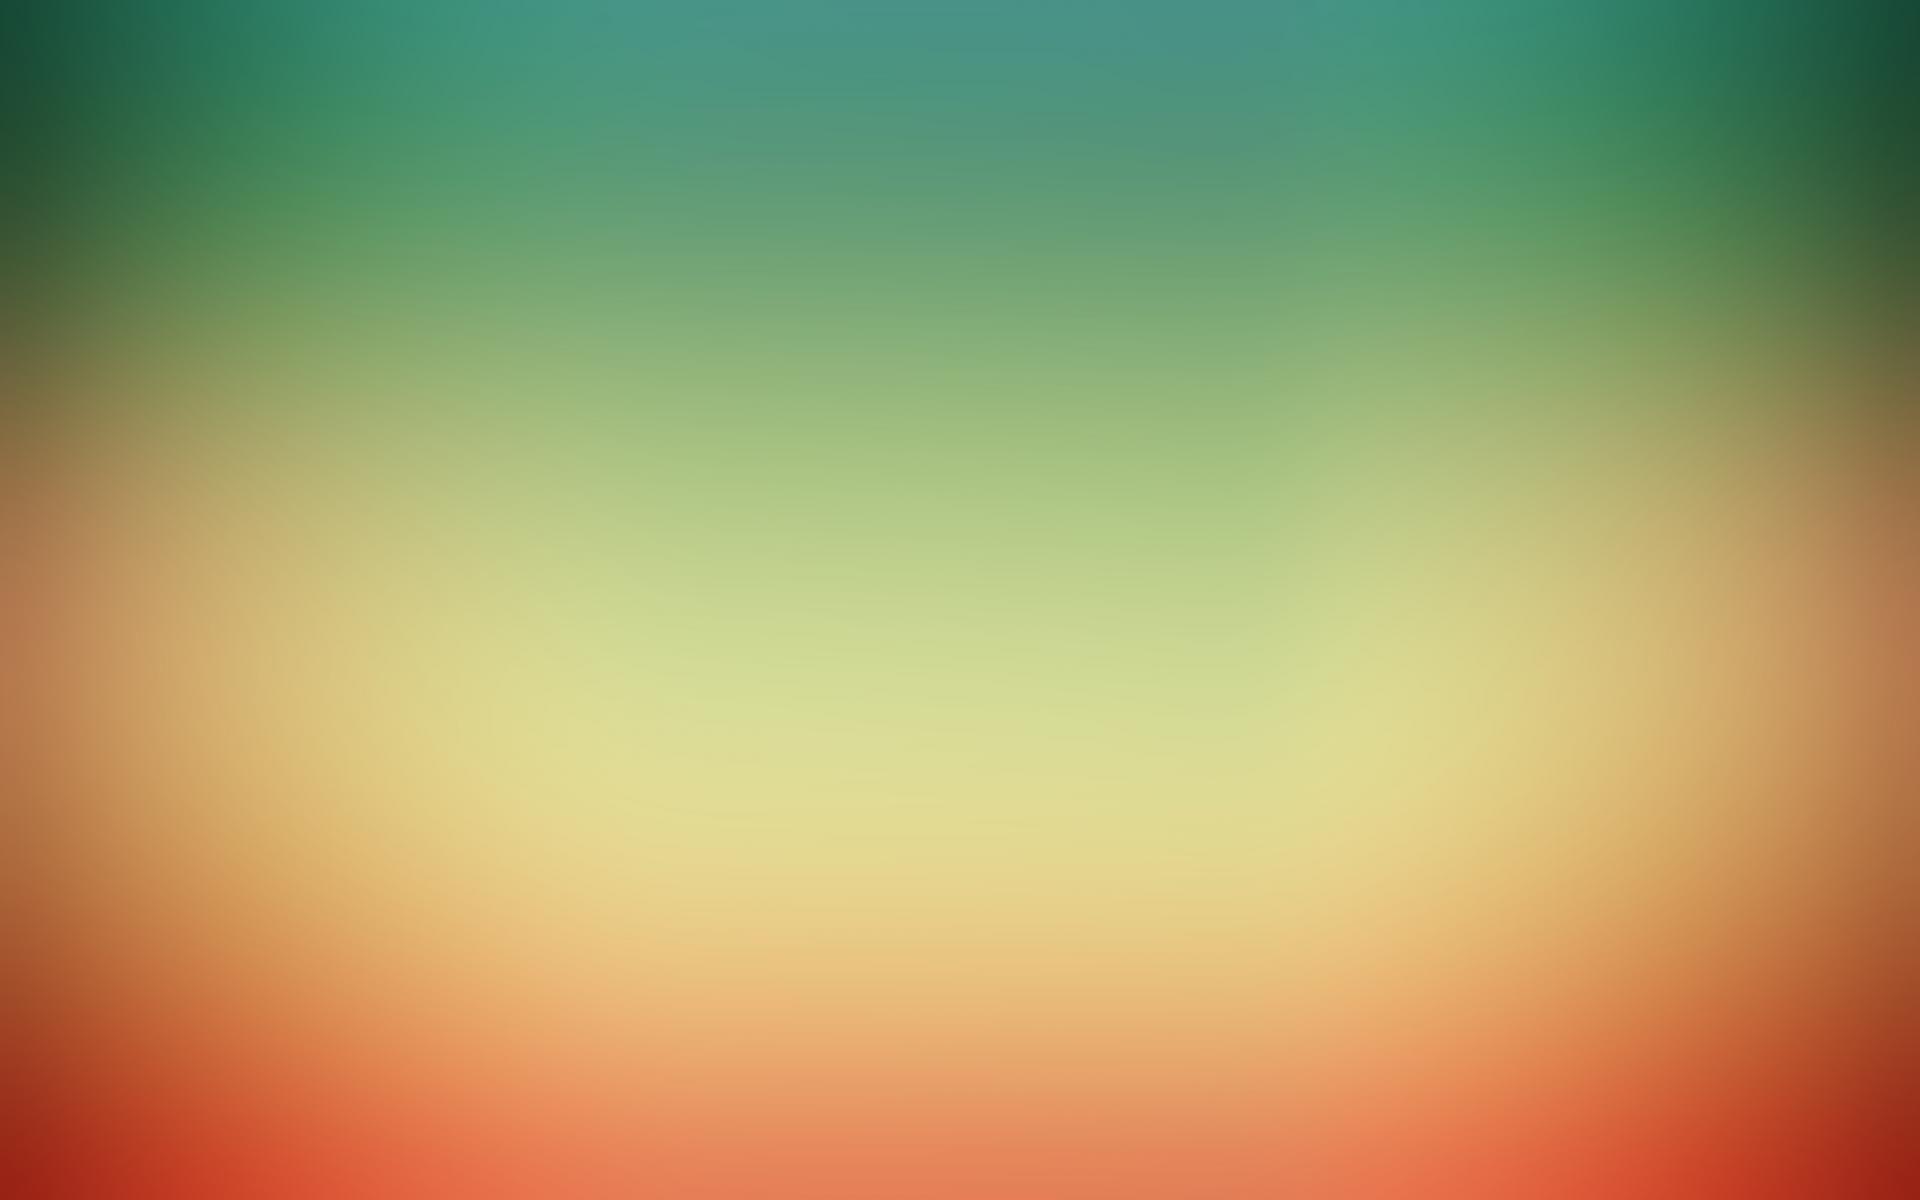 looking for good gradients as a book cover background for Divya